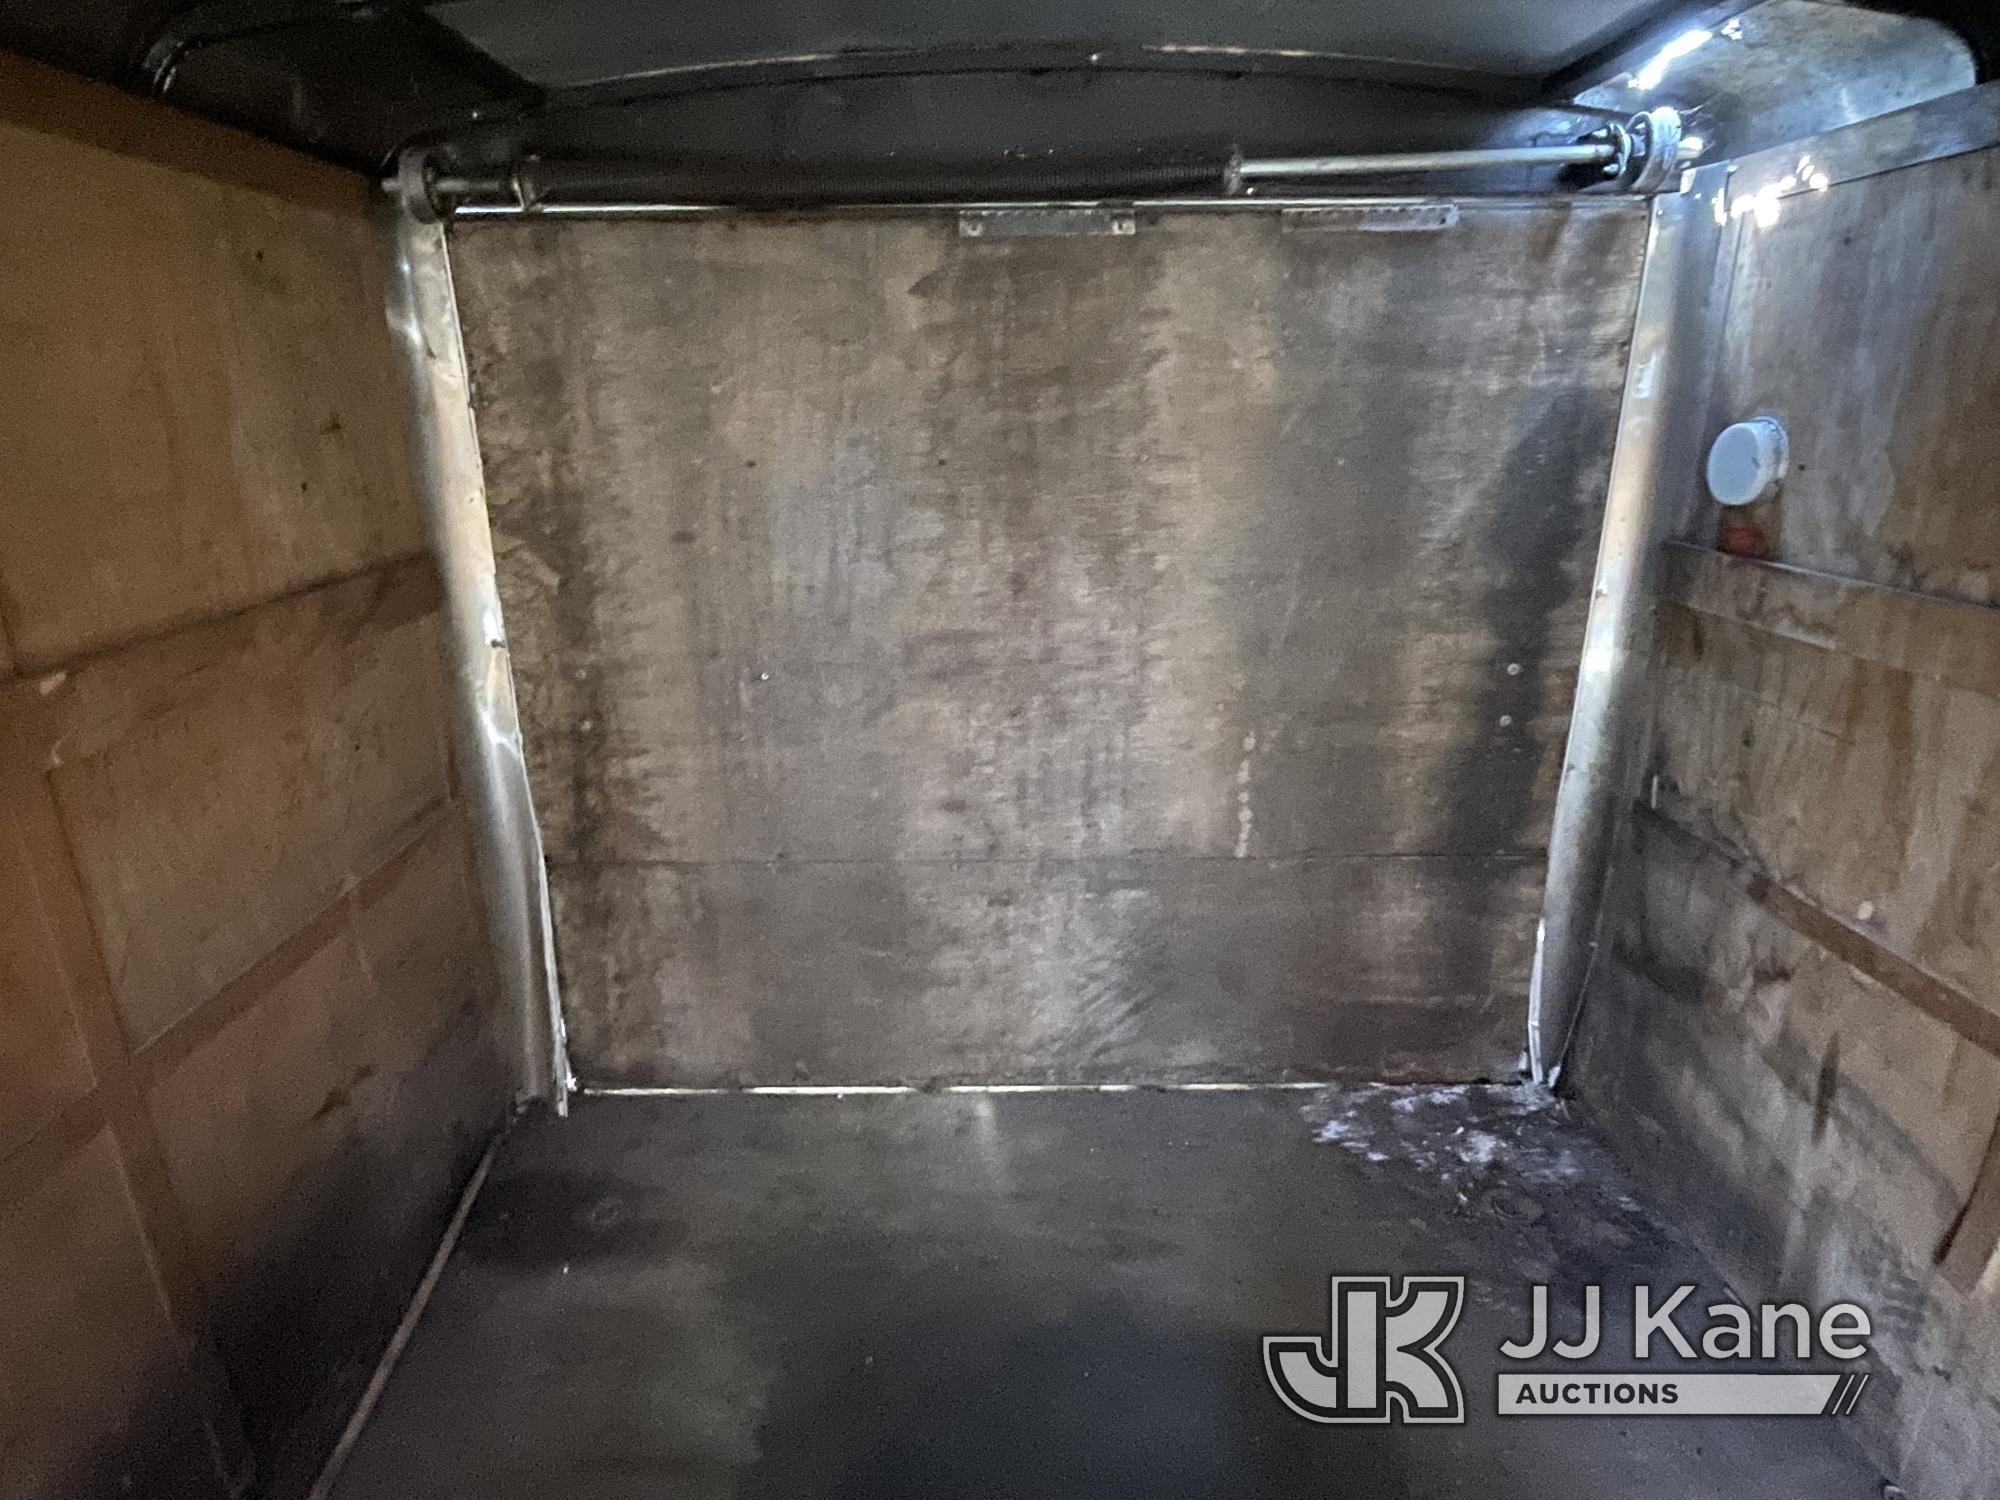 (Plymouth Meeting, PA) 2009 Carry-On REM 8x20CGR-7K T/A Enclosed Cargo Trailer Body & Rust Damage